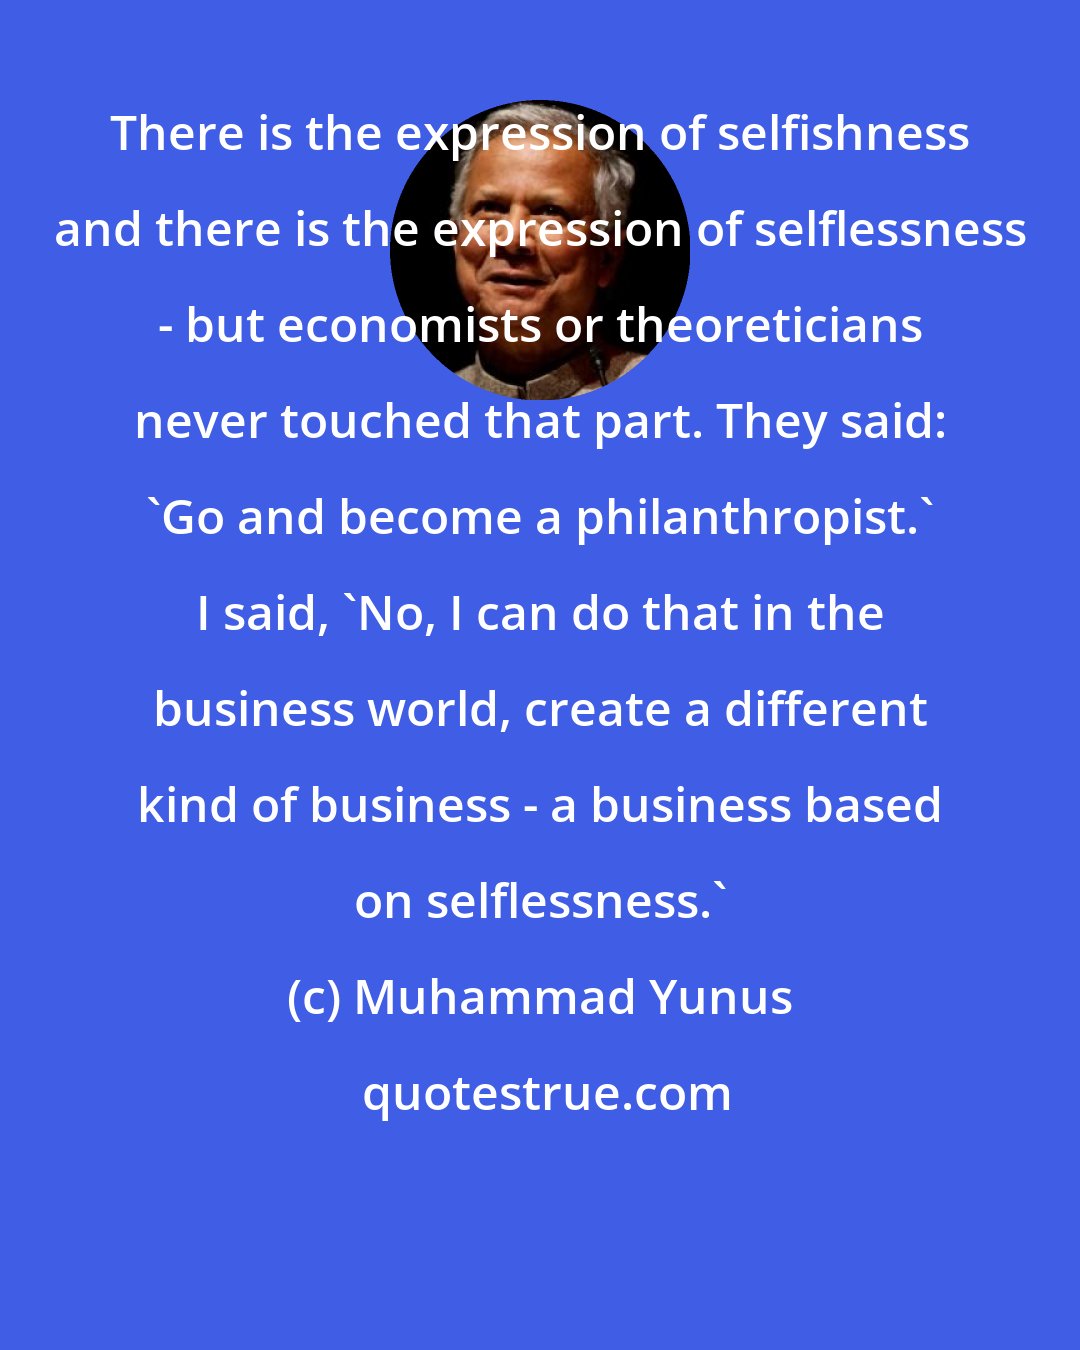 Muhammad Yunus: There is the expression of selfishness and there is the expression of selflessness - but economists or theoreticians never touched that part. They said: 'Go and become a philanthropist.' I said, 'No, I can do that in the business world, create a different kind of business - a business based on selflessness.'